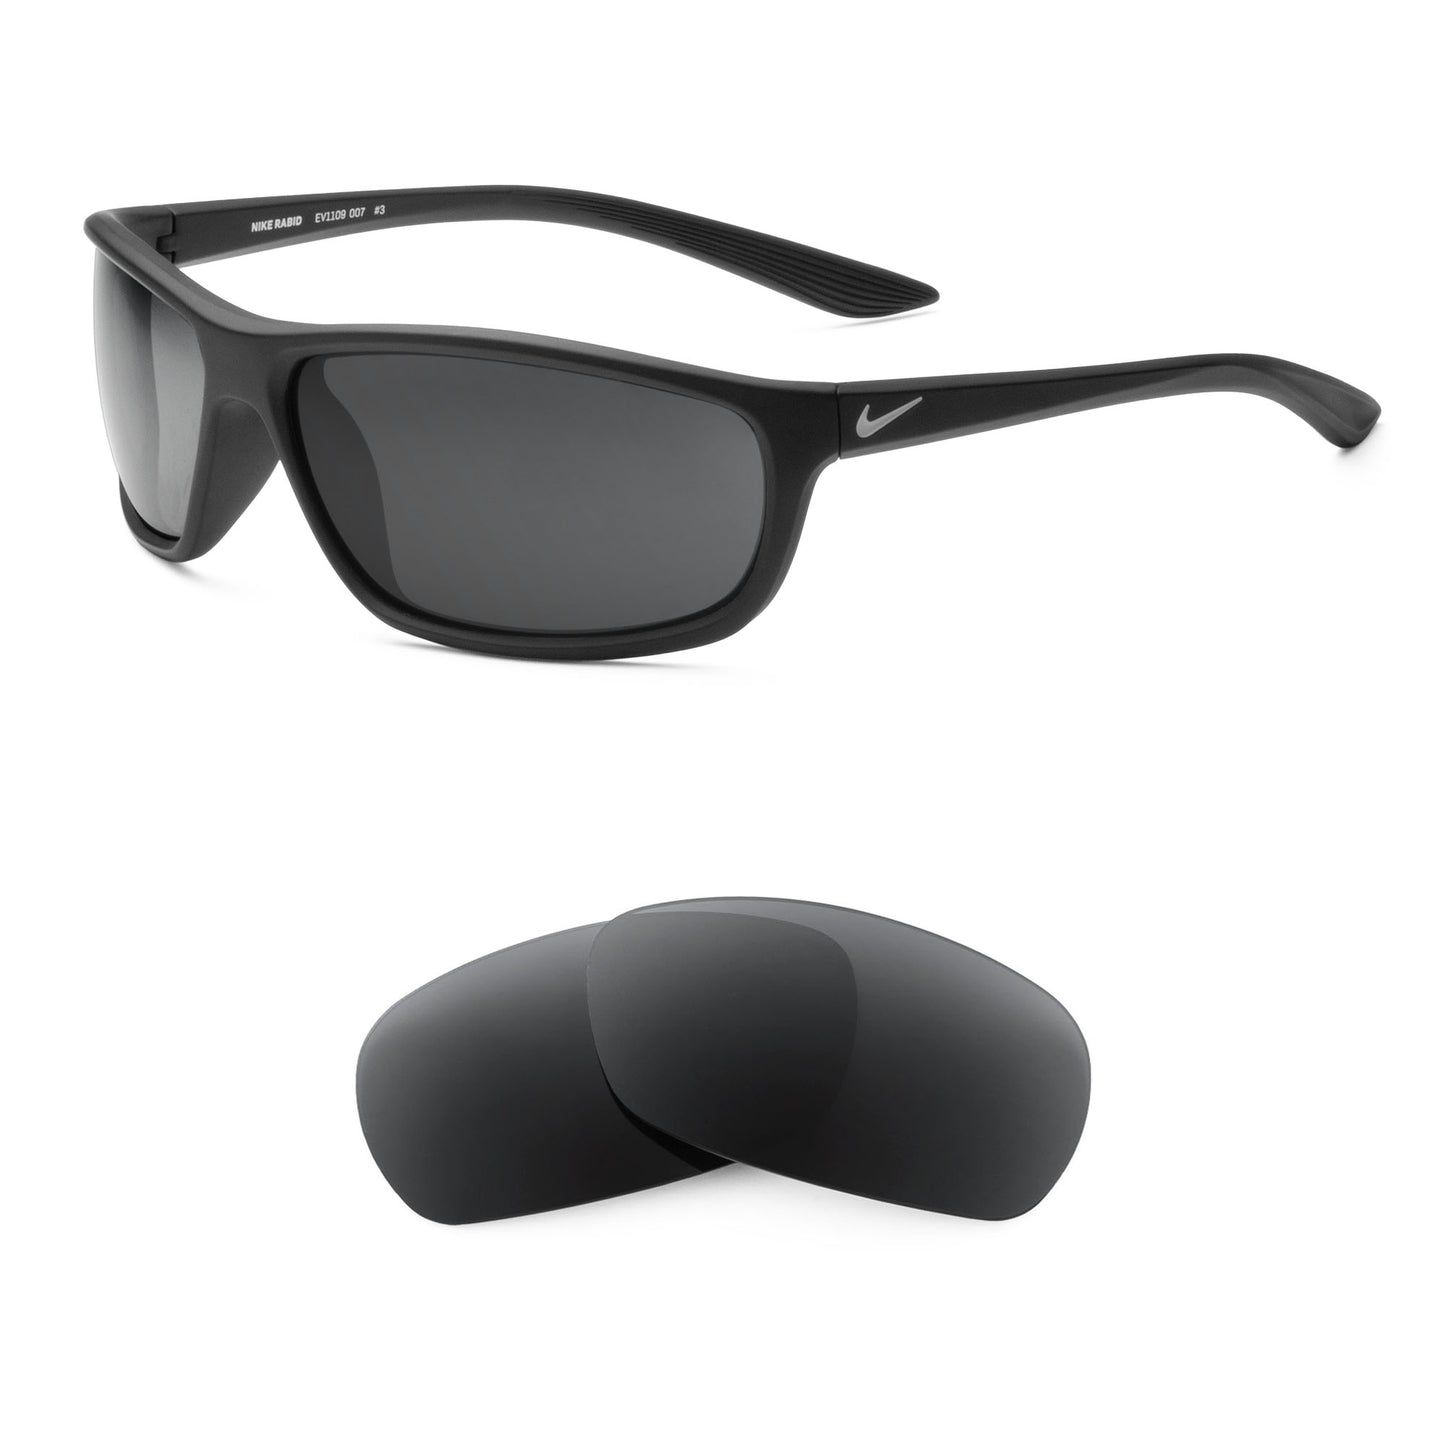 Nike Rabid 2 sunglasses with replacement lenses